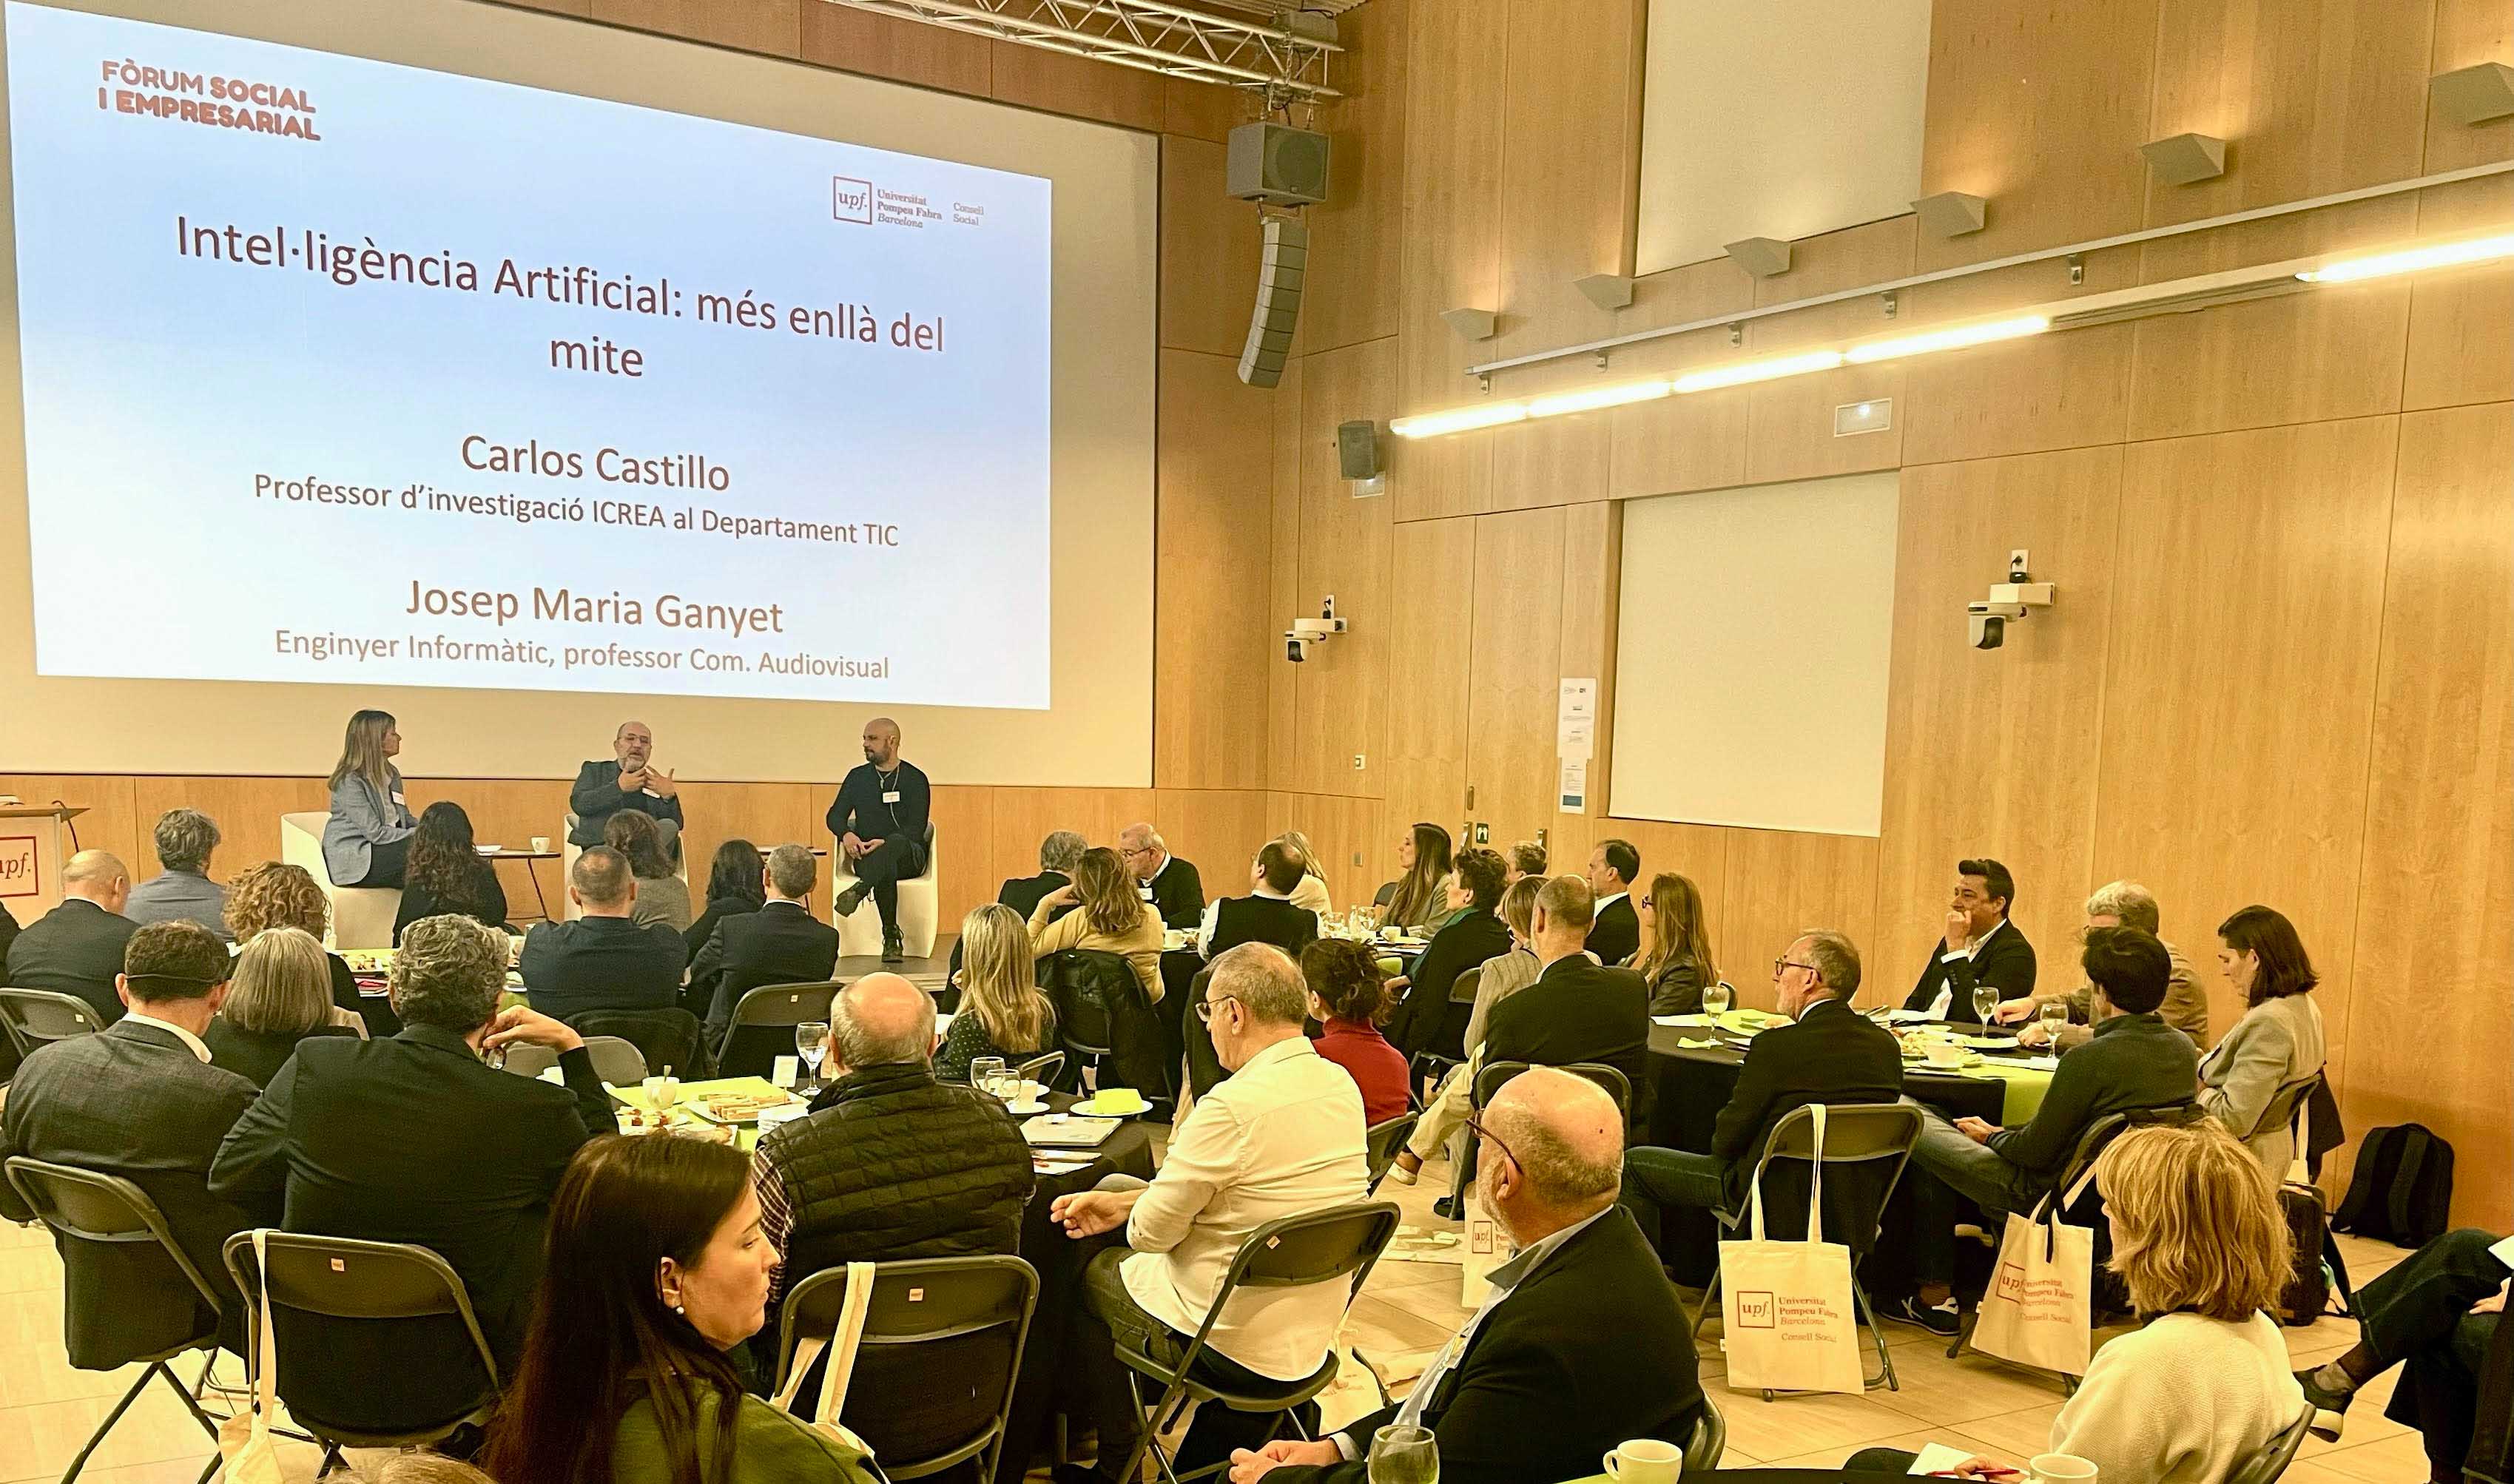 Horizons and challenges of artificial intelligence at the Social and Business Forum of the UPF